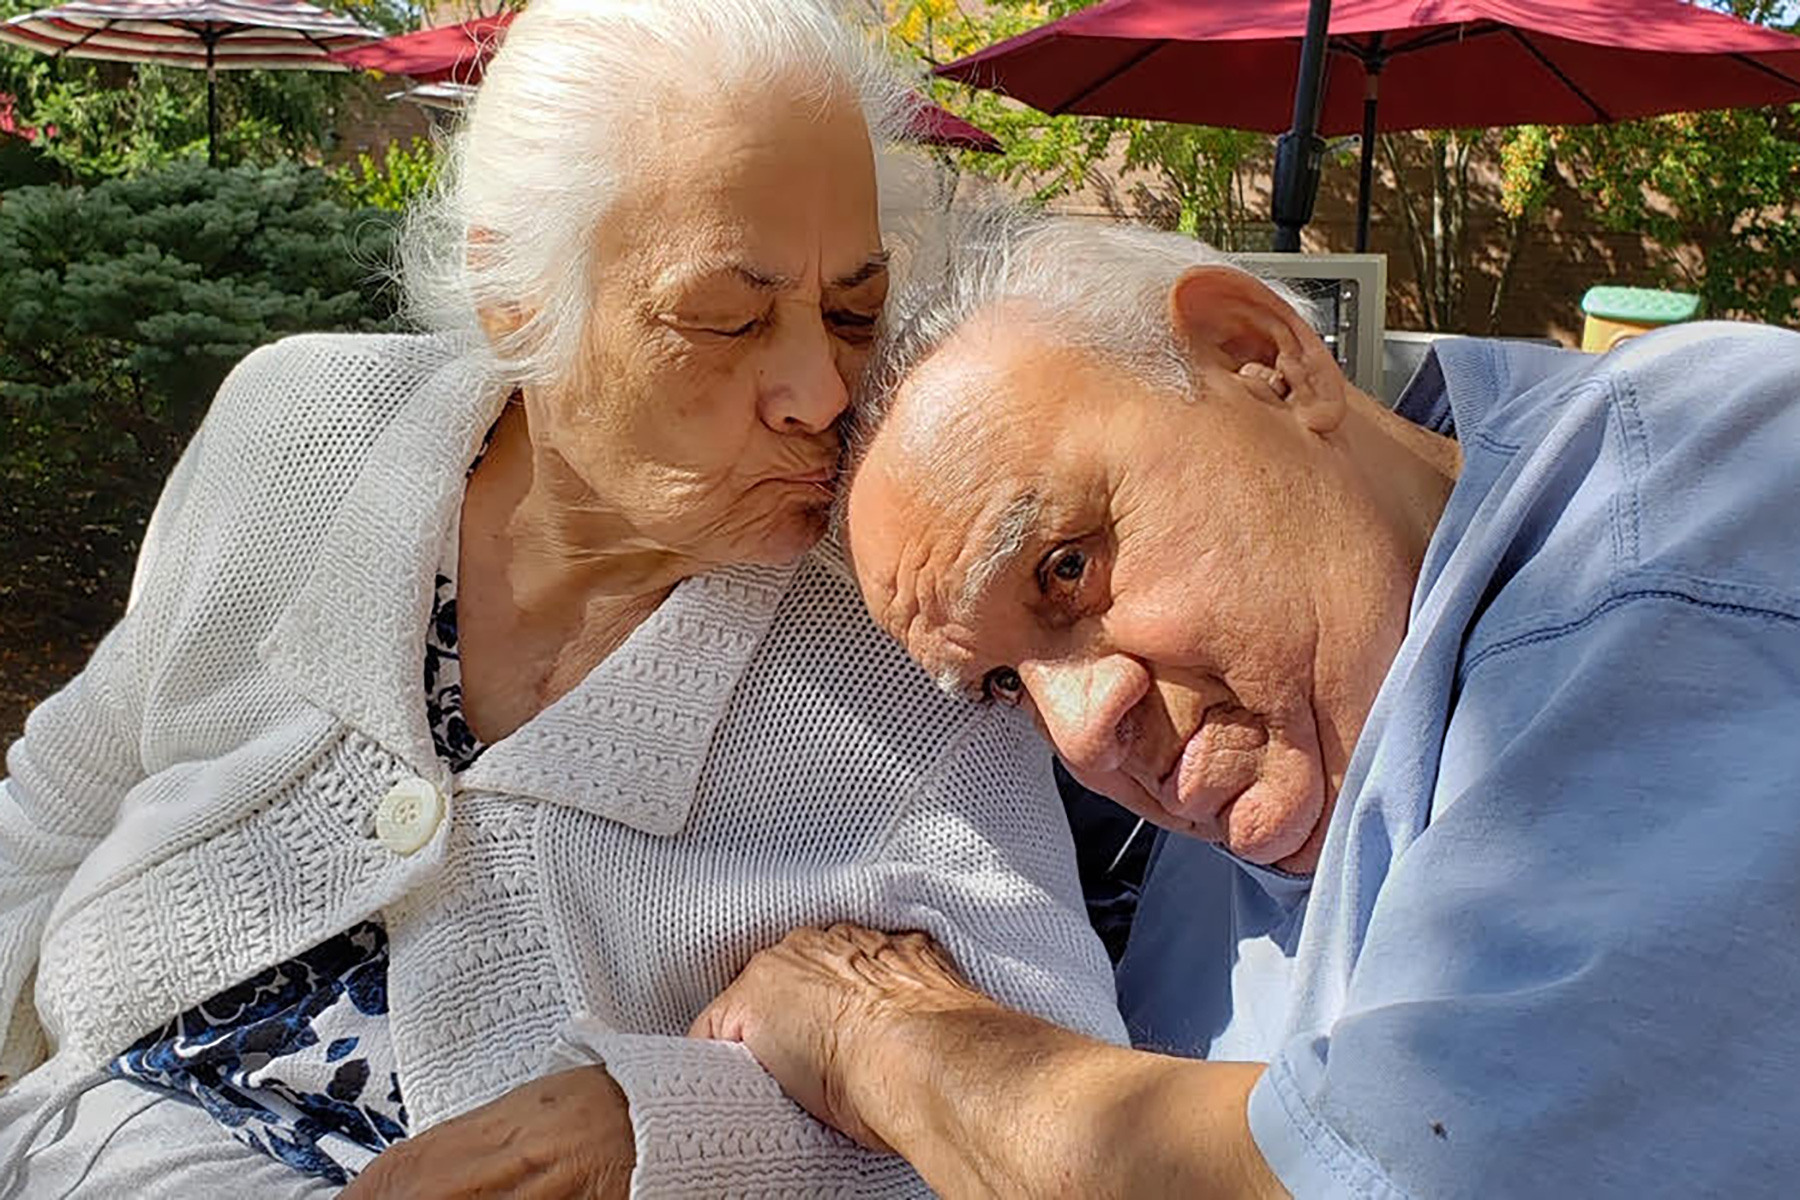 Julia Ramos' grandmother, Angelica Mendez, with her husband Pedro Mendez, on their 64th wedding anniversary. (Courtesy of Julia Ramos)